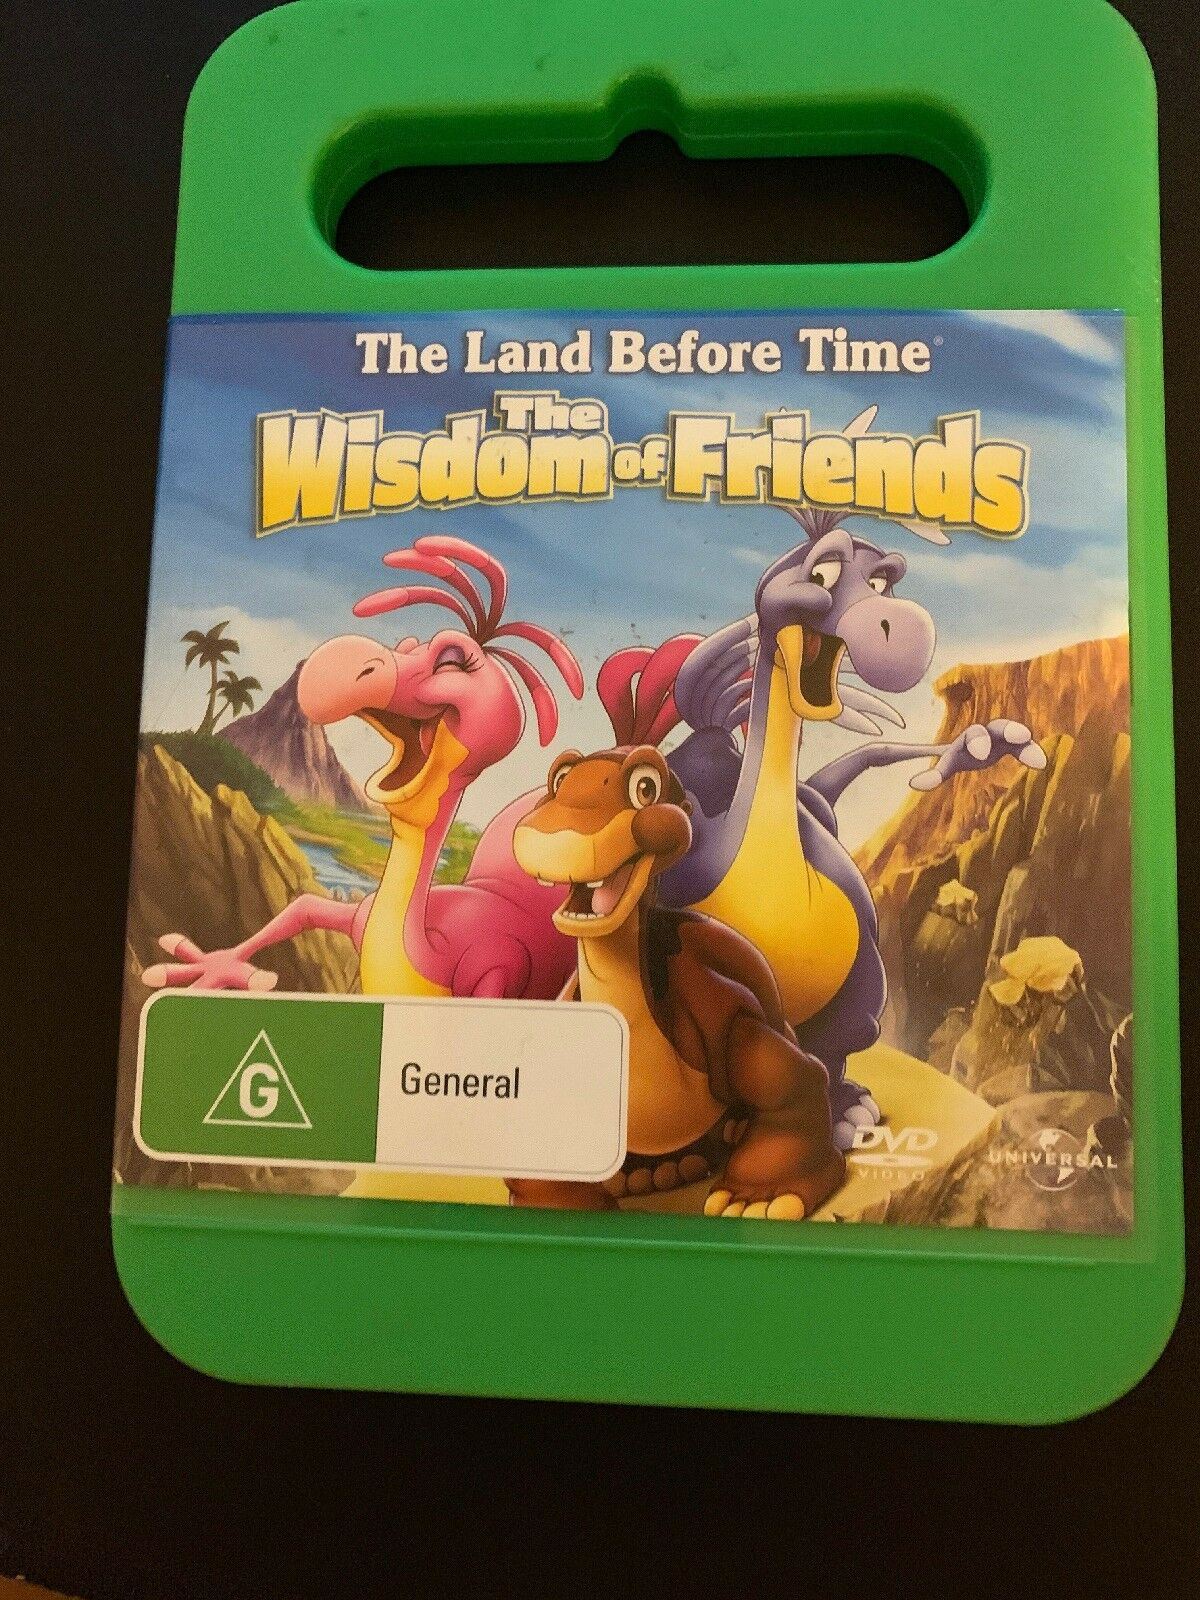 The Land Before Time - Wisdom Of Friends : Vol 13 (DVD, 2010)